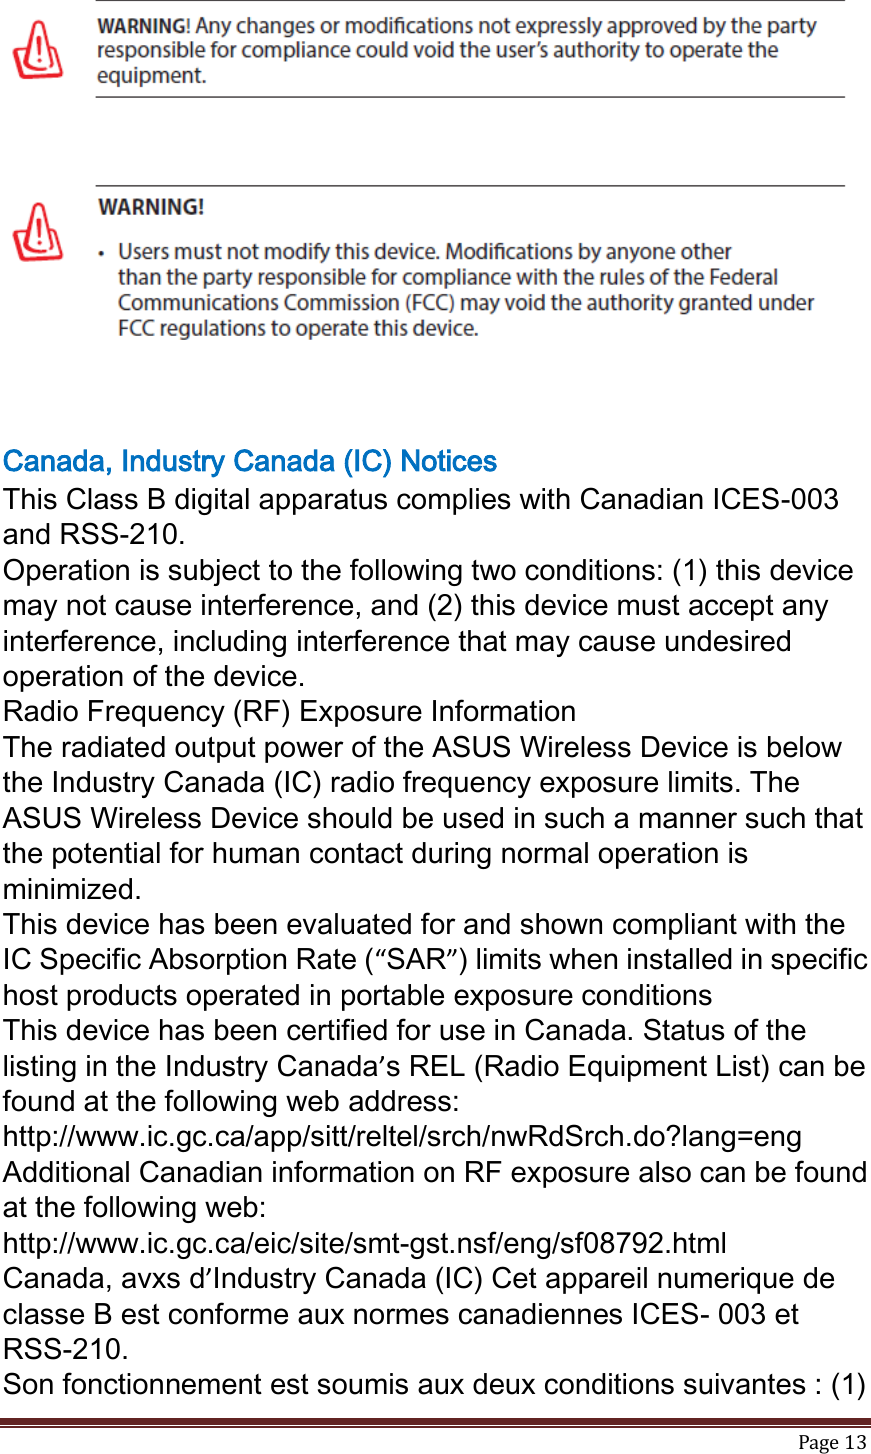   Page 13    Canada, Industry Canada (IC) Notices This Class B digital apparatus complies with Canadian ICES-003 and RSS-210. Operation is subject to the following two conditions: (1) this device may not cause interference, and (2) this device must accept any interference, including interference that may cause undesired operation of the device. Radio Frequency (RF) Exposure Information The radiated output power of the ASUS Wireless Device is below the Industry Canada (IC) radio frequency exposure limits. The ASUS Wireless Device should be used in such a manner such that the potential for human contact during normal operation is minimized. This device has been evaluated for and shown compliant with the IC Specific Absorption Rate (“SAR”) limits when installed in specific host products operated in portable exposure conditions This device has been certified for use in Canada. Status of the listing in the Industry Canada’s REL (Radio Equipment List) can be found at the following web address: http://www.ic.gc.ca/app/sitt/reltel/srch/nwRdSrch.do?lang=eng Additional Canadian information on RF exposure also can be found at the following web: http://www.ic.gc.ca/eic/site/smt-gst.nsf/eng/sf08792.html Canada, avxs d’Industry Canada (IC) Cet appareil numerique de classe B est conforme aux normes canadiennes ICES- 003 et RSS-210. Son fonctionnement est soumis aux deux conditions suivantes : (1) 